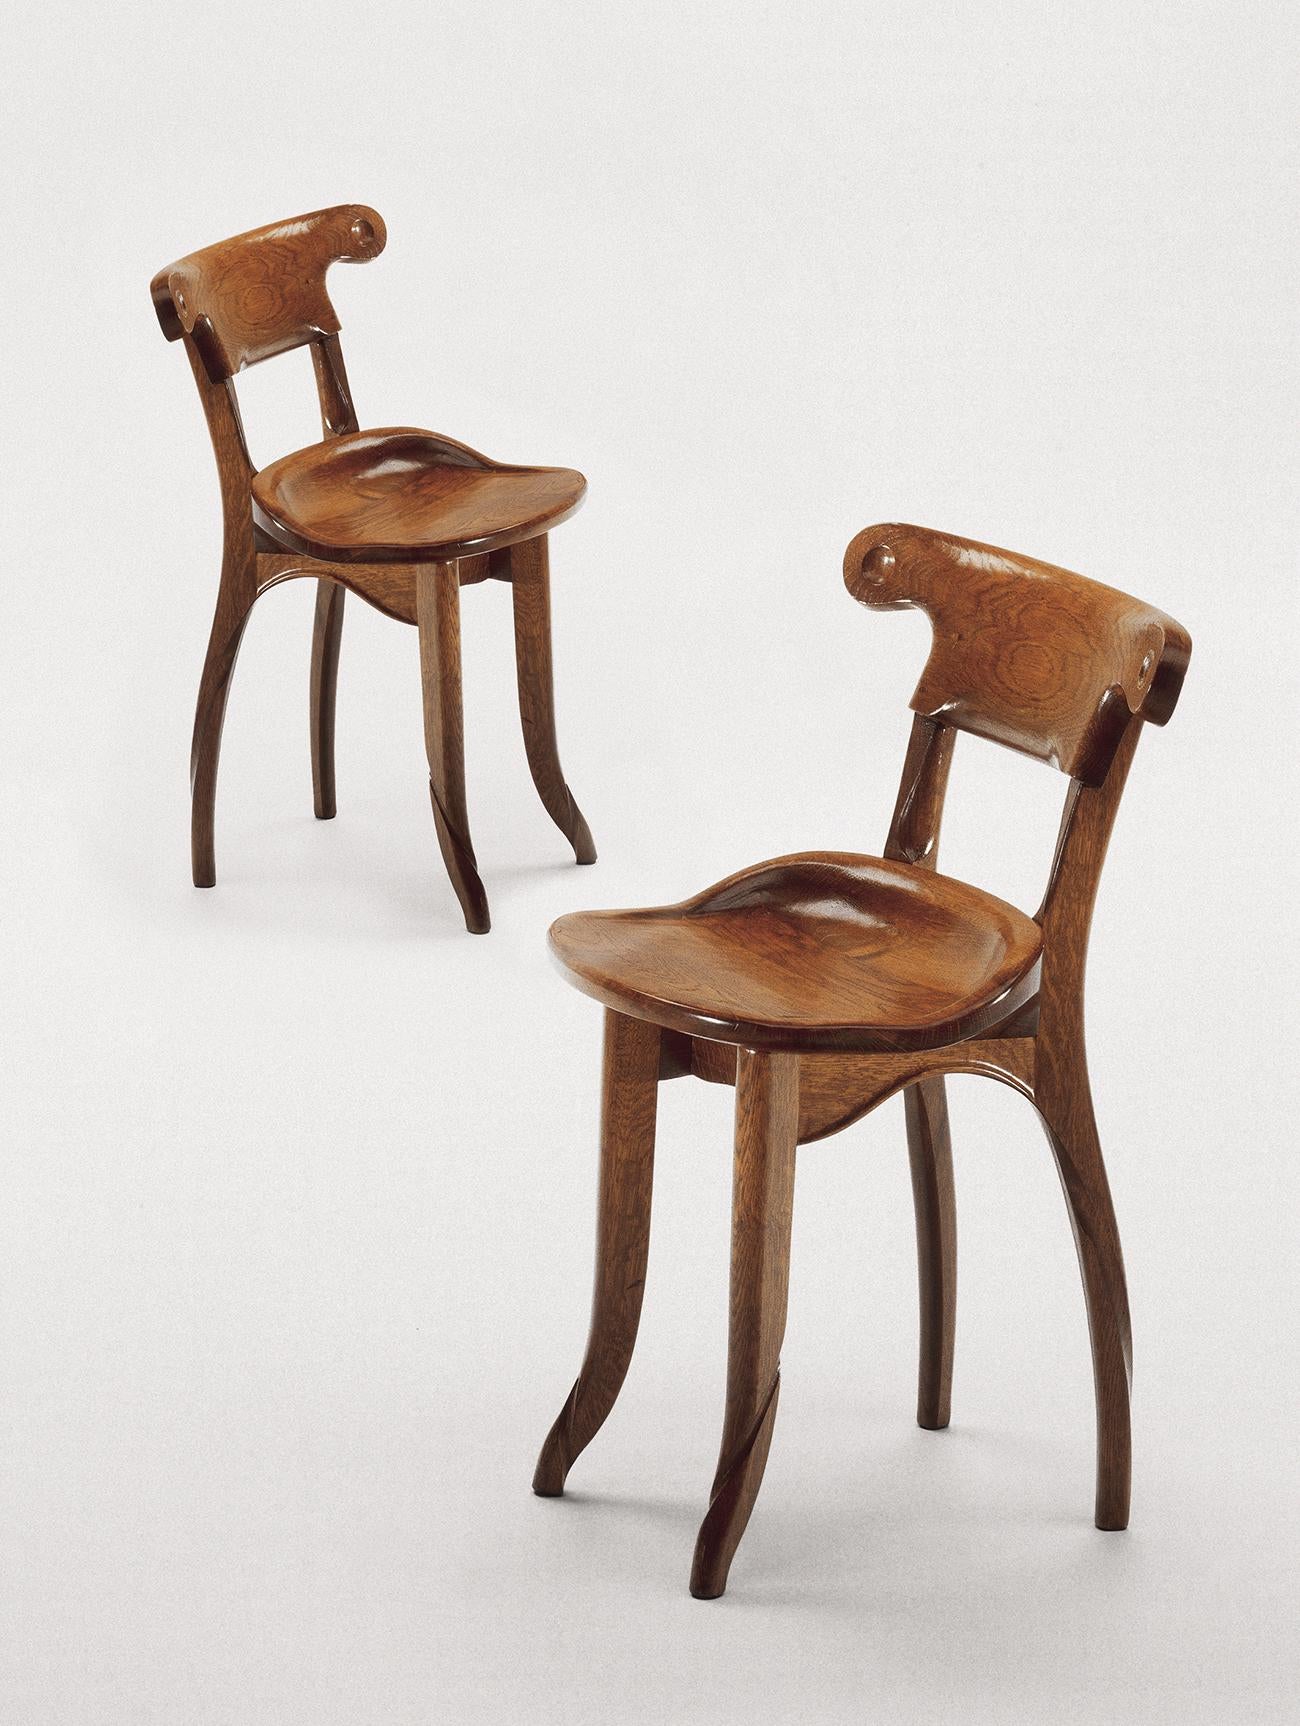 Batllo chair by Antonio Gaudí
1906
Dimensions: 74 x 52 x 47 cm
Materials: dark varnished oak

Solid dark varnished oak

Antoni Gaudí (1852/1926) is, without doubt, the most internationally well-known Spanish architect. But is not only his